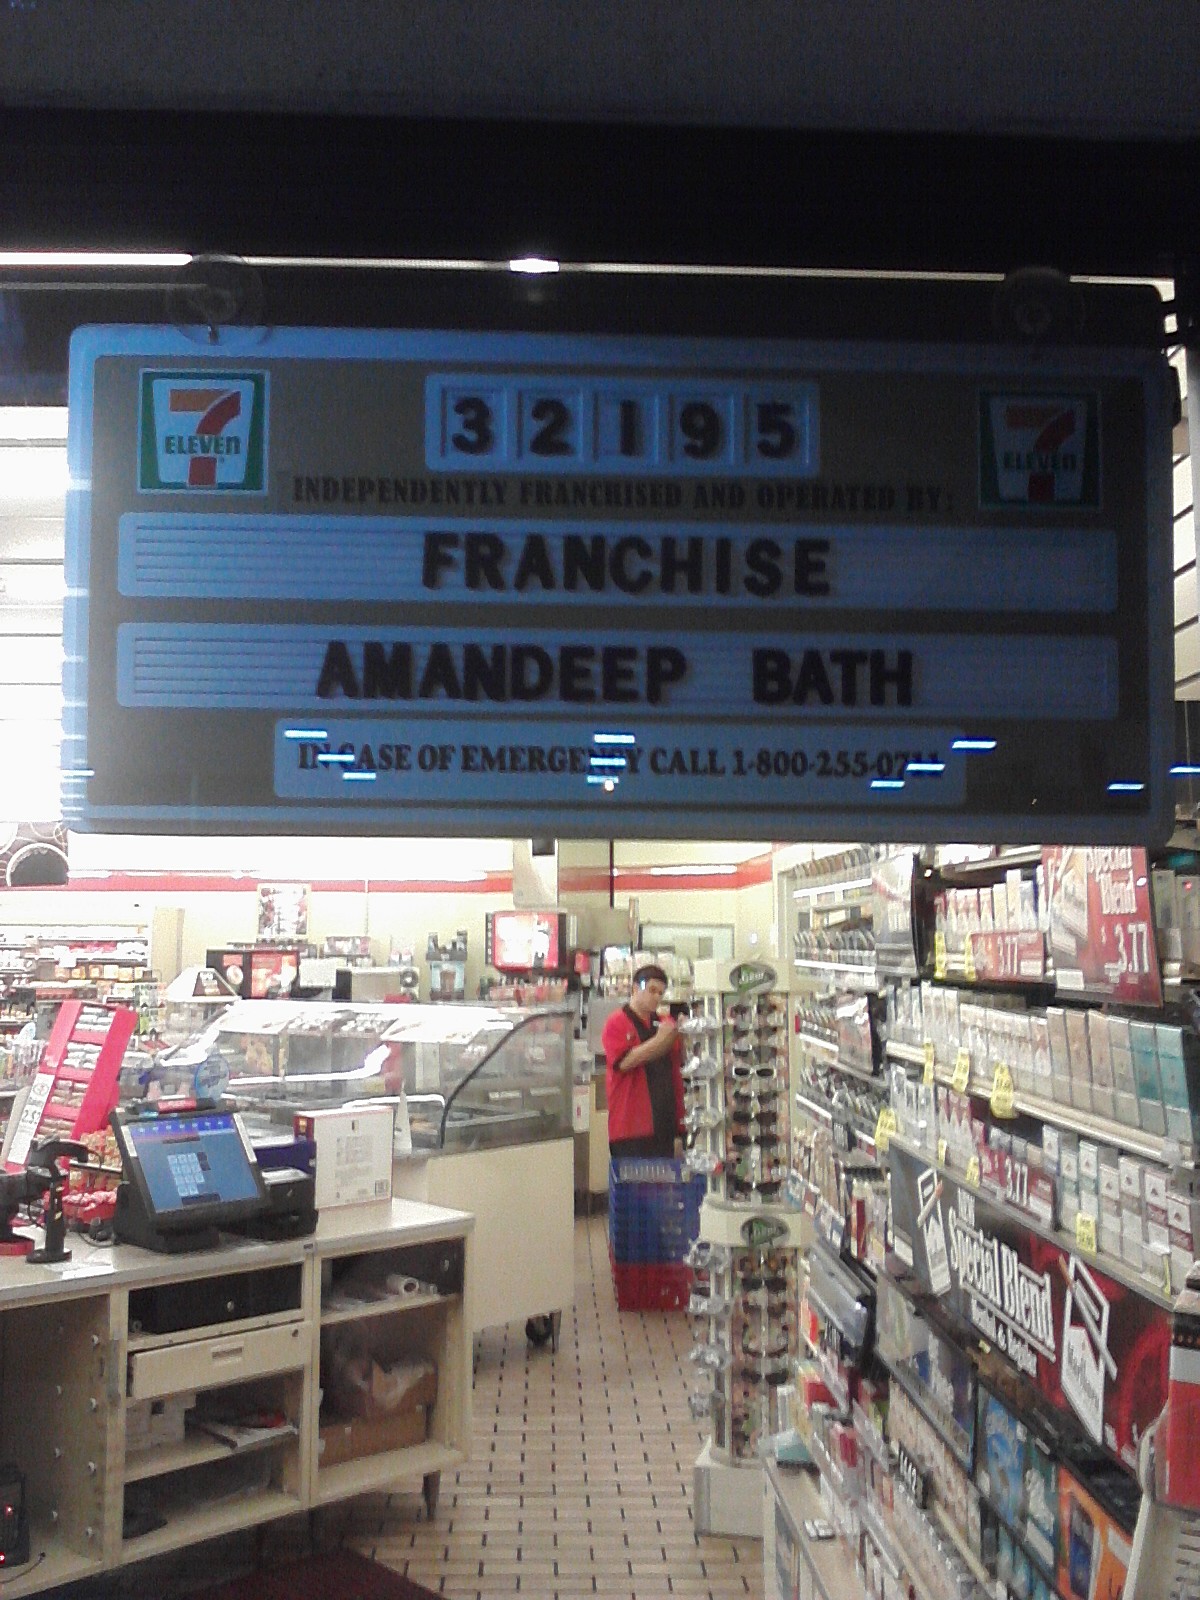 i wonder if he was named after how he got to francise this 7-11!